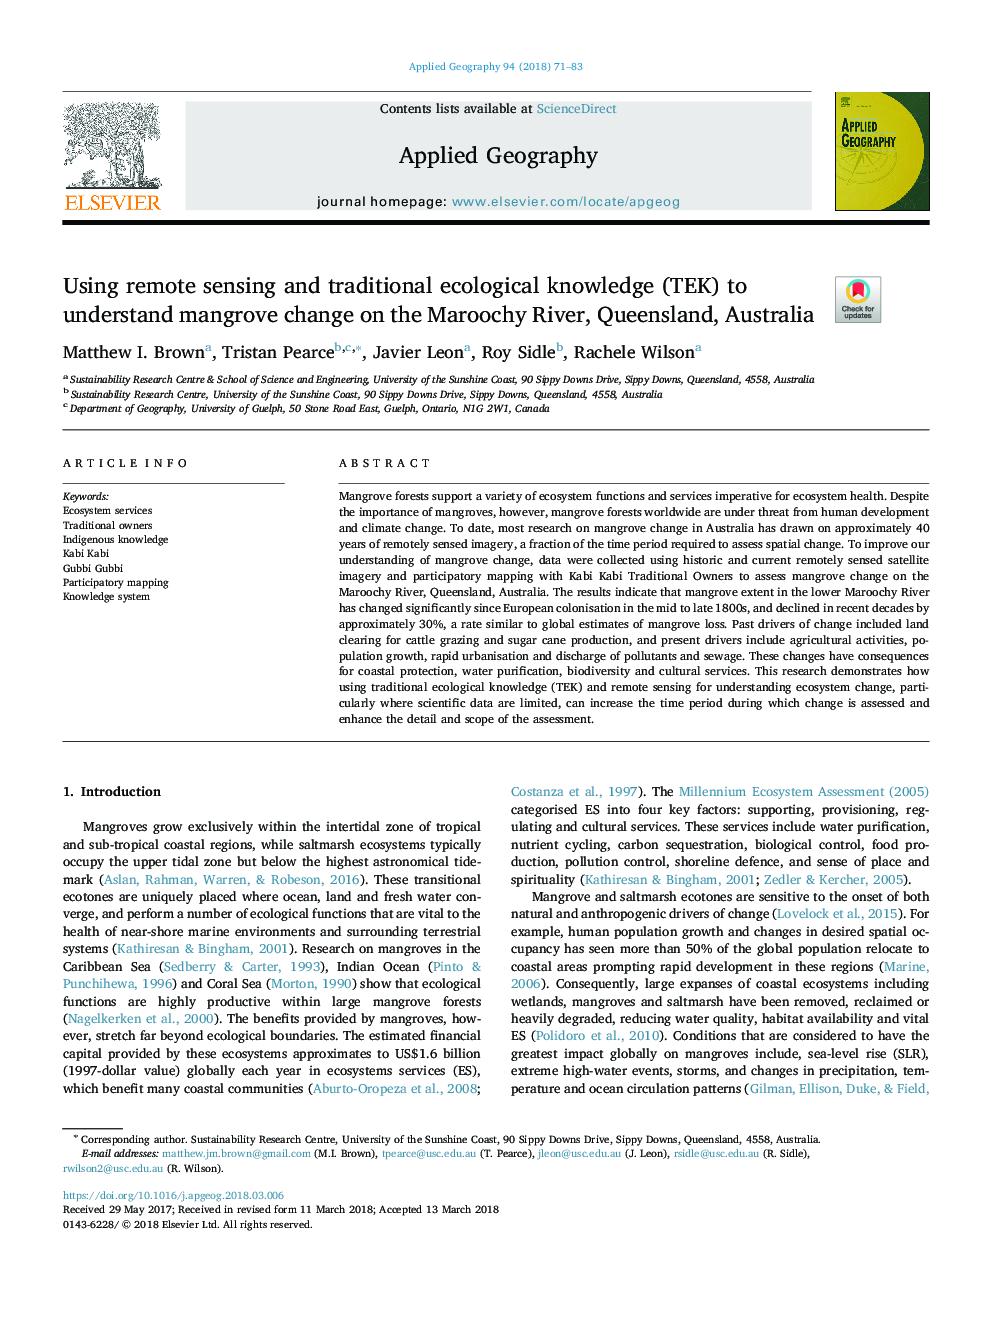 Using remote sensing and traditional ecological knowledge (TEK) to understand mangrove change on the Maroochy River, Queensland, Australia